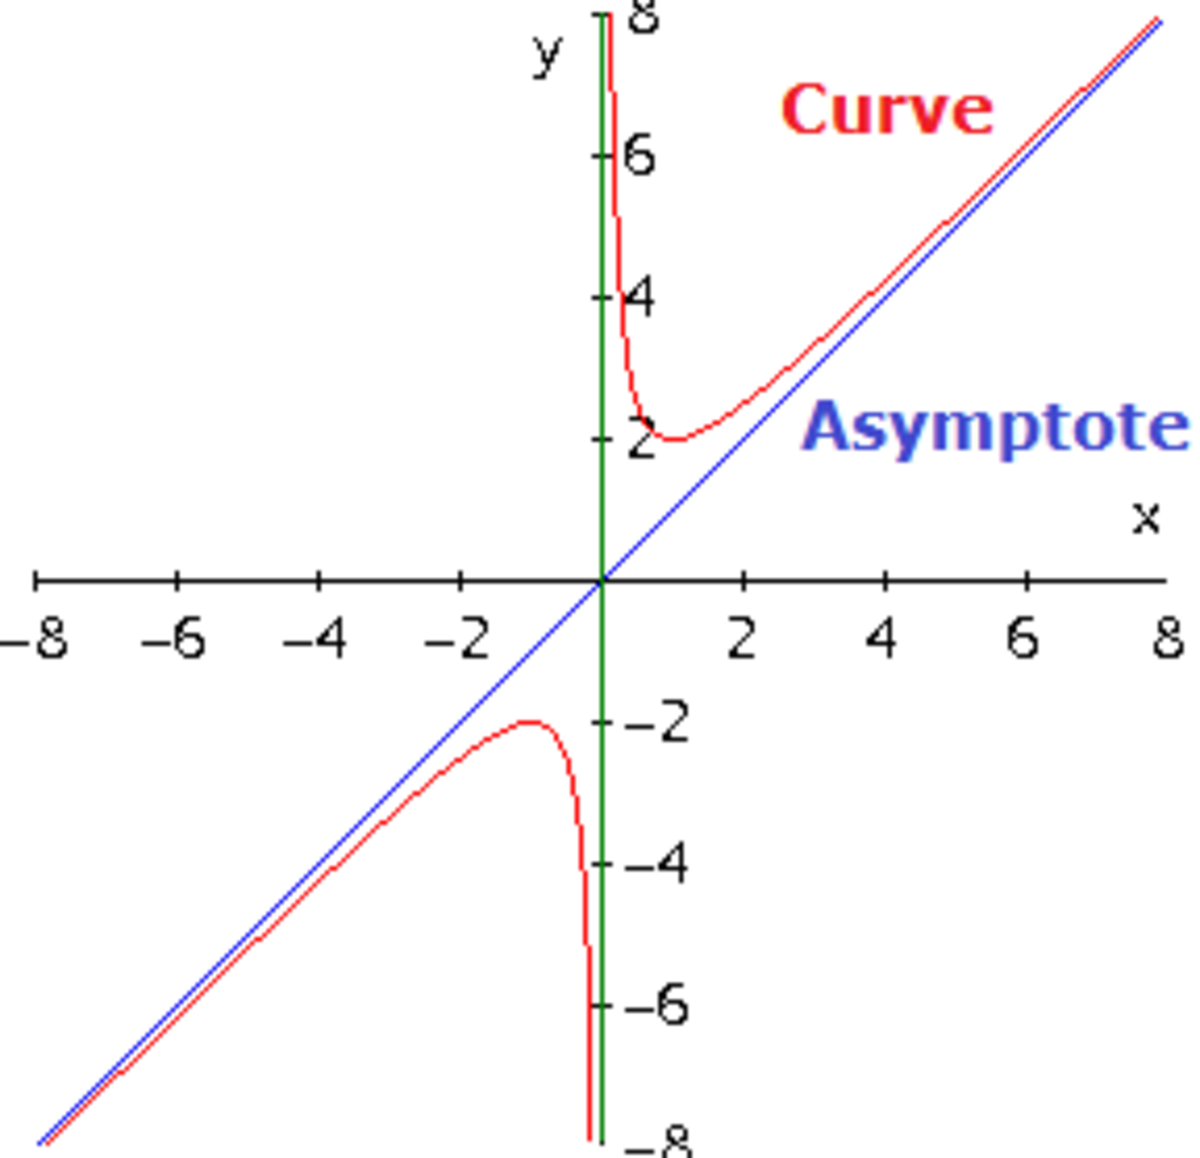 As for knowledge and belief, an asymptote will travel to infinity before meeting its curve.